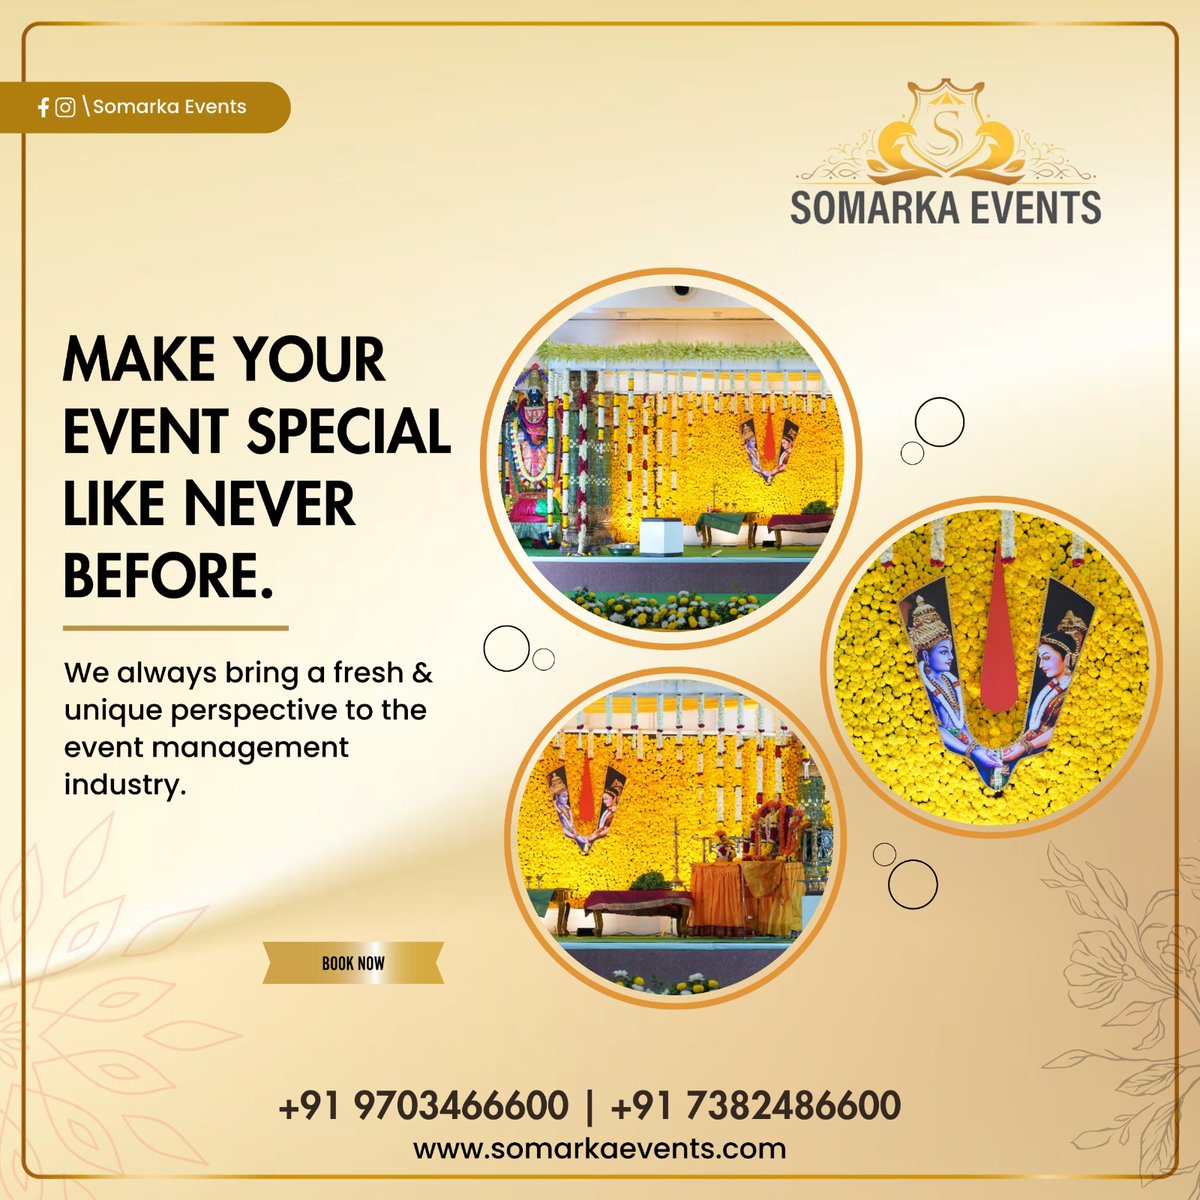 Our latest devotional event setup transcends the ordinary, elevating every moment into a spiritual journey. 

📞 Contact Numbers: +91 97034 66600 | +91 73824 86600

#SomarkaEvents #BestEventDesigners #BestEventOrganisation #BestEventPlanners #EventsinVizag #ThemeParty